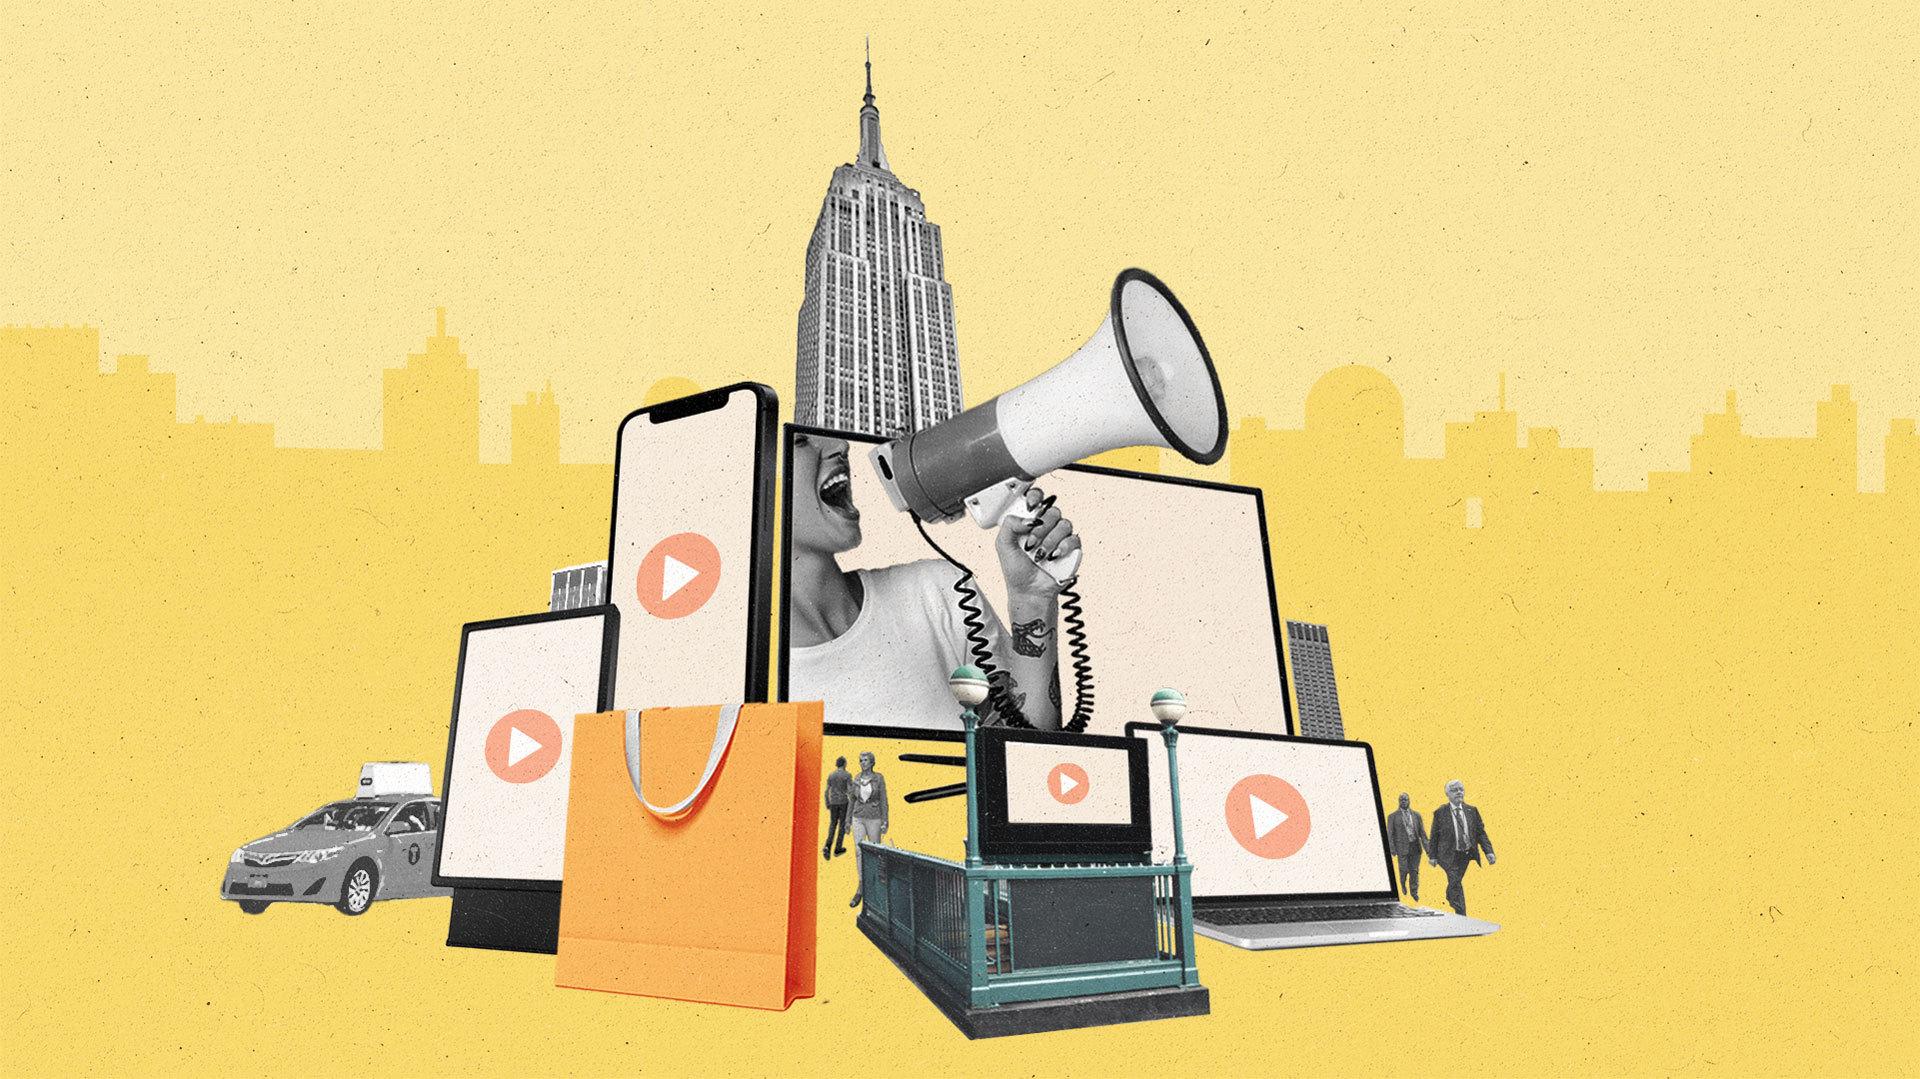 The Empire State Building stands above devices such as a DOOH kiosk, a smartphone, a laptop, and an LCD TV along with a subway entrance, a taxi and a shopping bag. A woman with a megaphone emerges from a television.